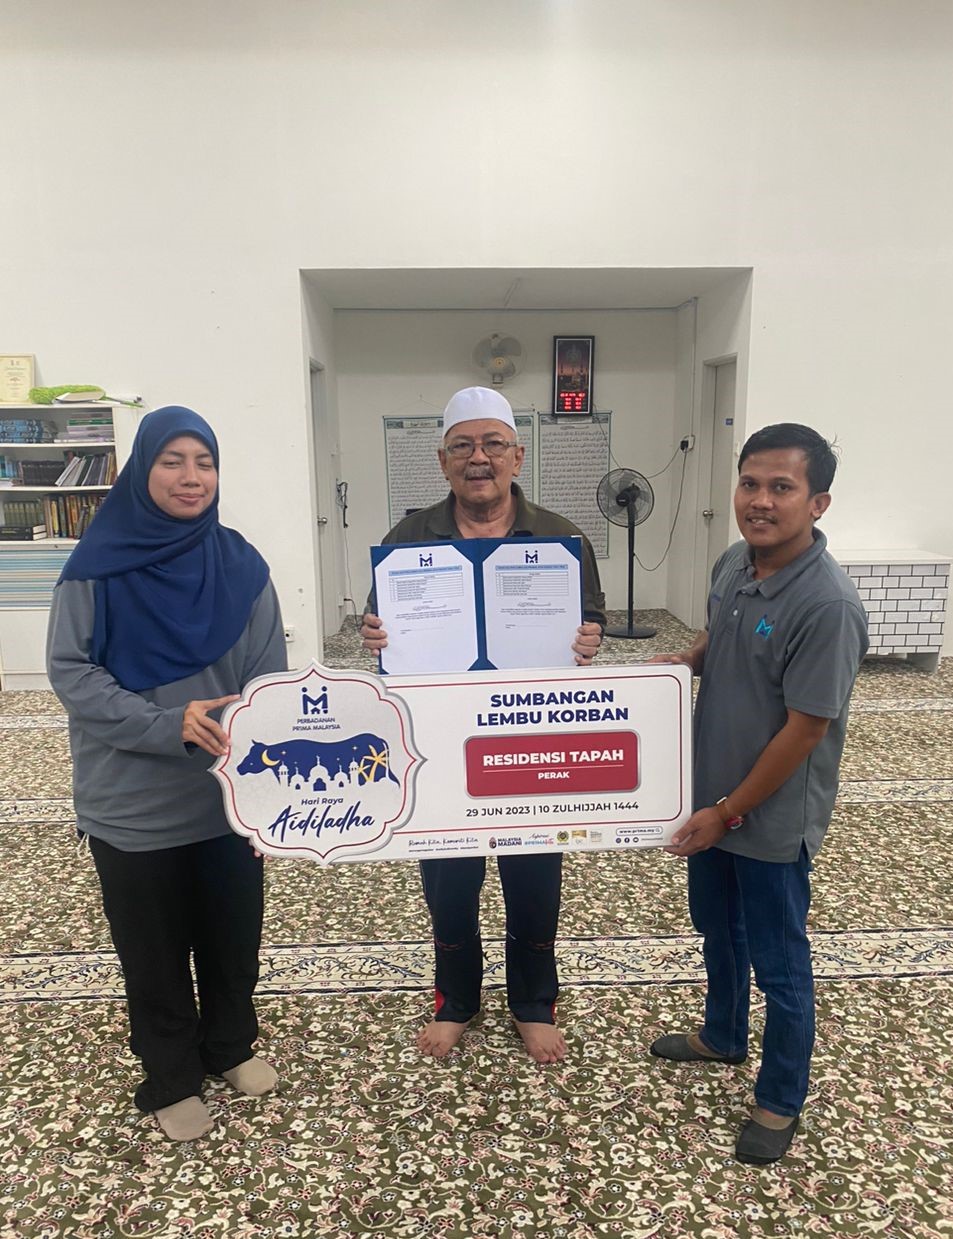 Cover image of Community Past Program: PR1MA Raya Qurban – Contribution and sponsorships of cows which in line with the #PR1MAKita Aspiration at Residensi Tapah, Perak.